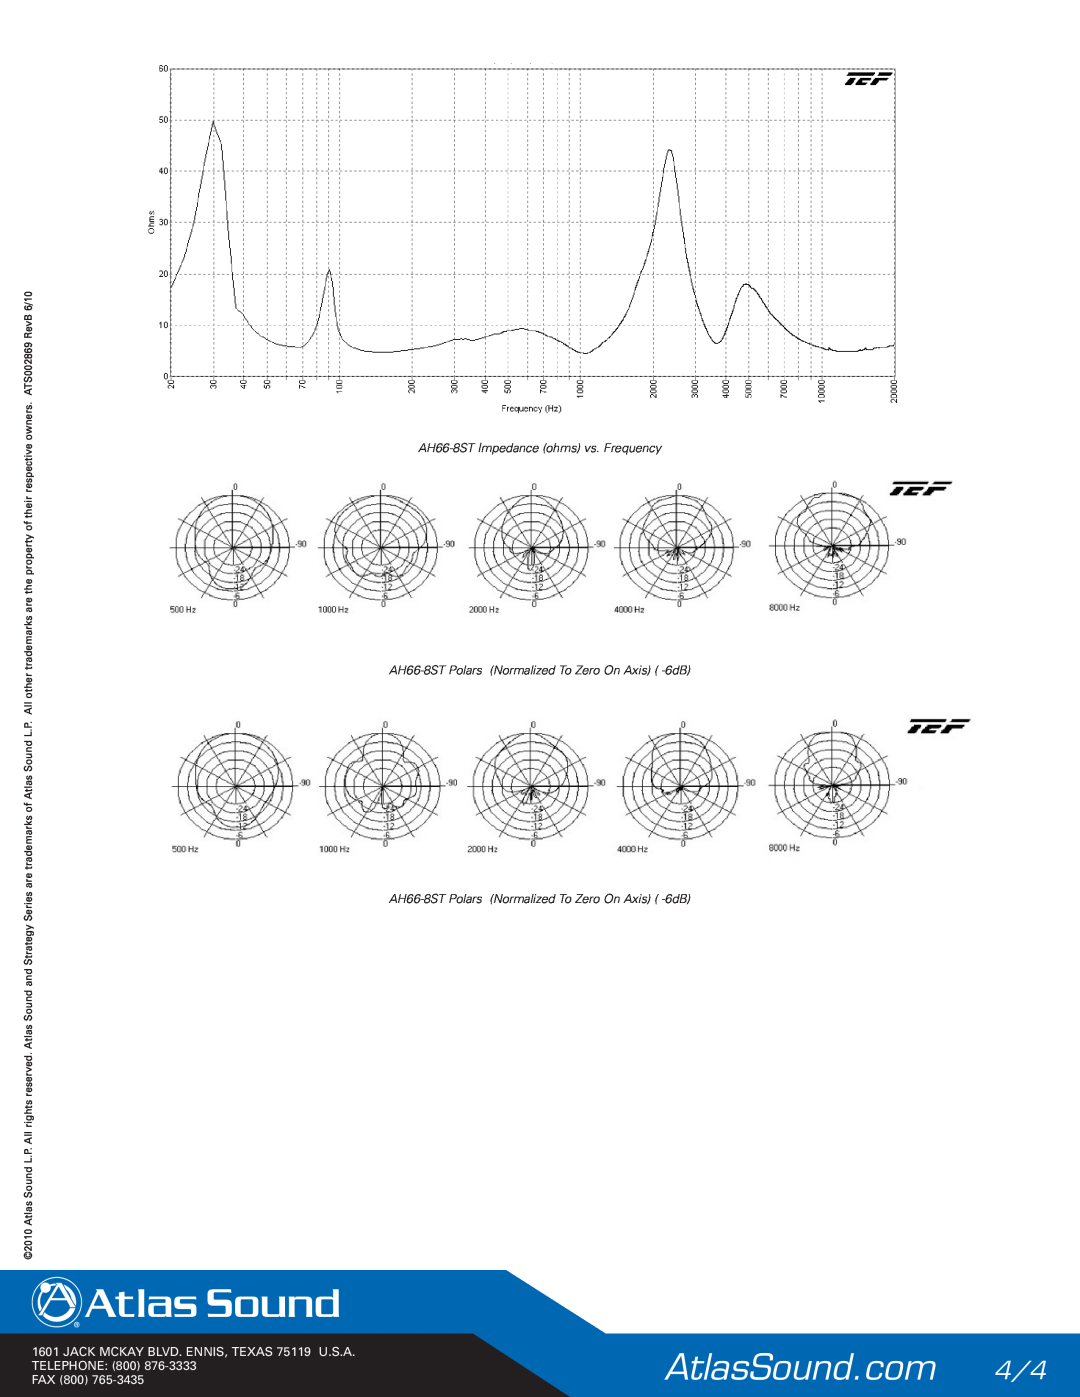 Atlas Sound manual AH66-8STImpedance ohms vs. Frequency, AH66-8STPolars Normalized To Zero On Axis -6dB, Fax 